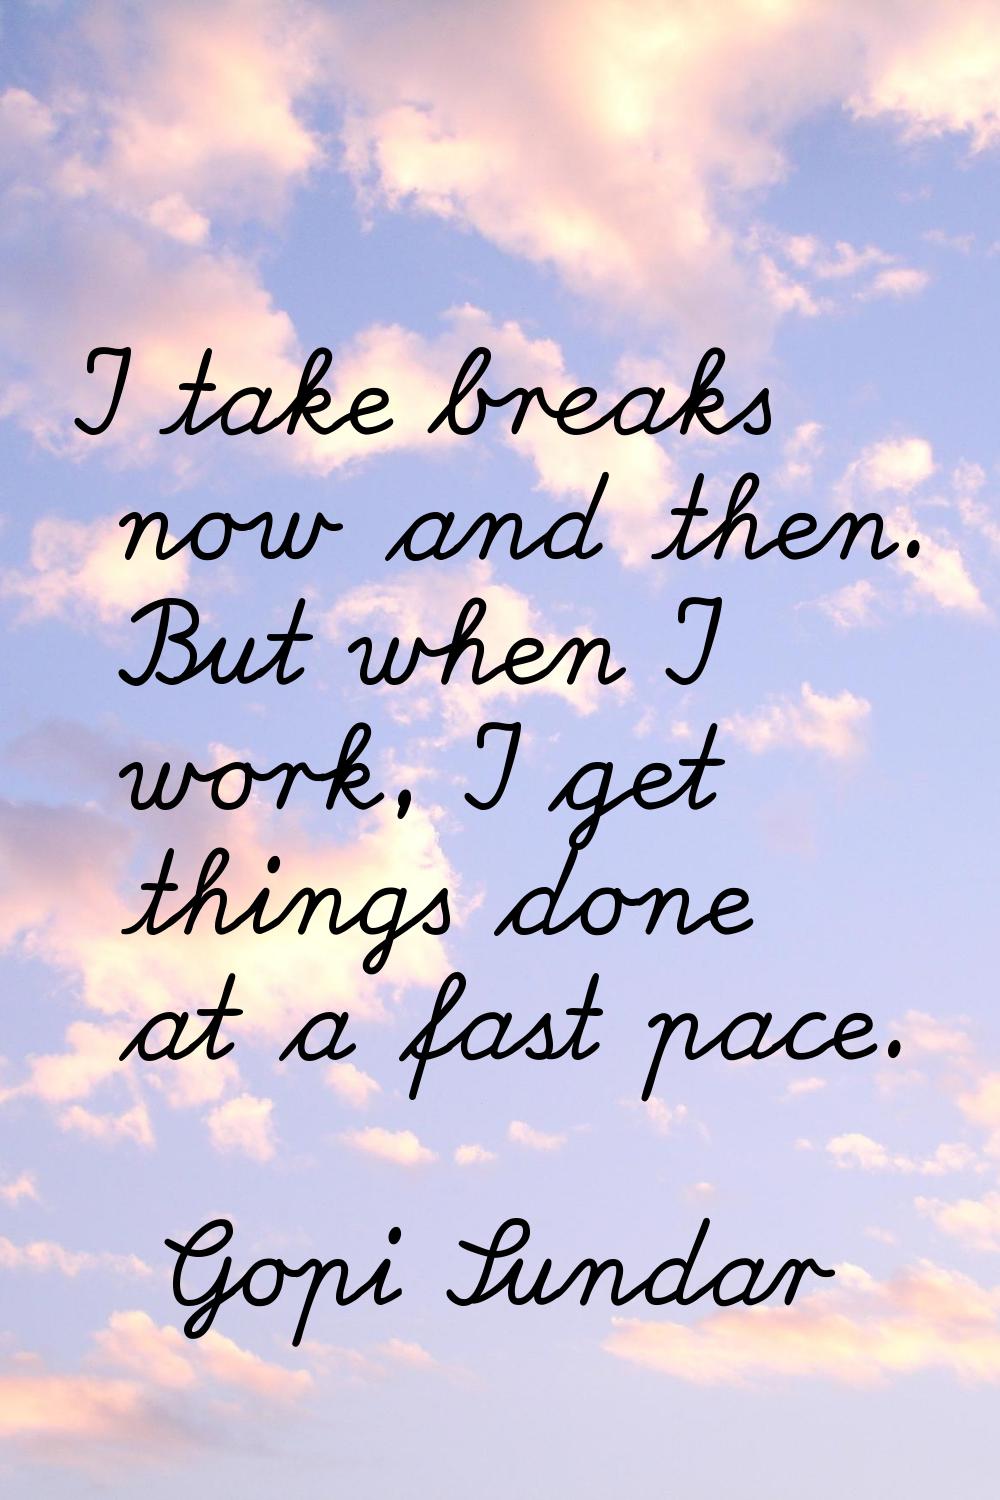 I take breaks now and then. But when I work, I get things done at a fast pace.